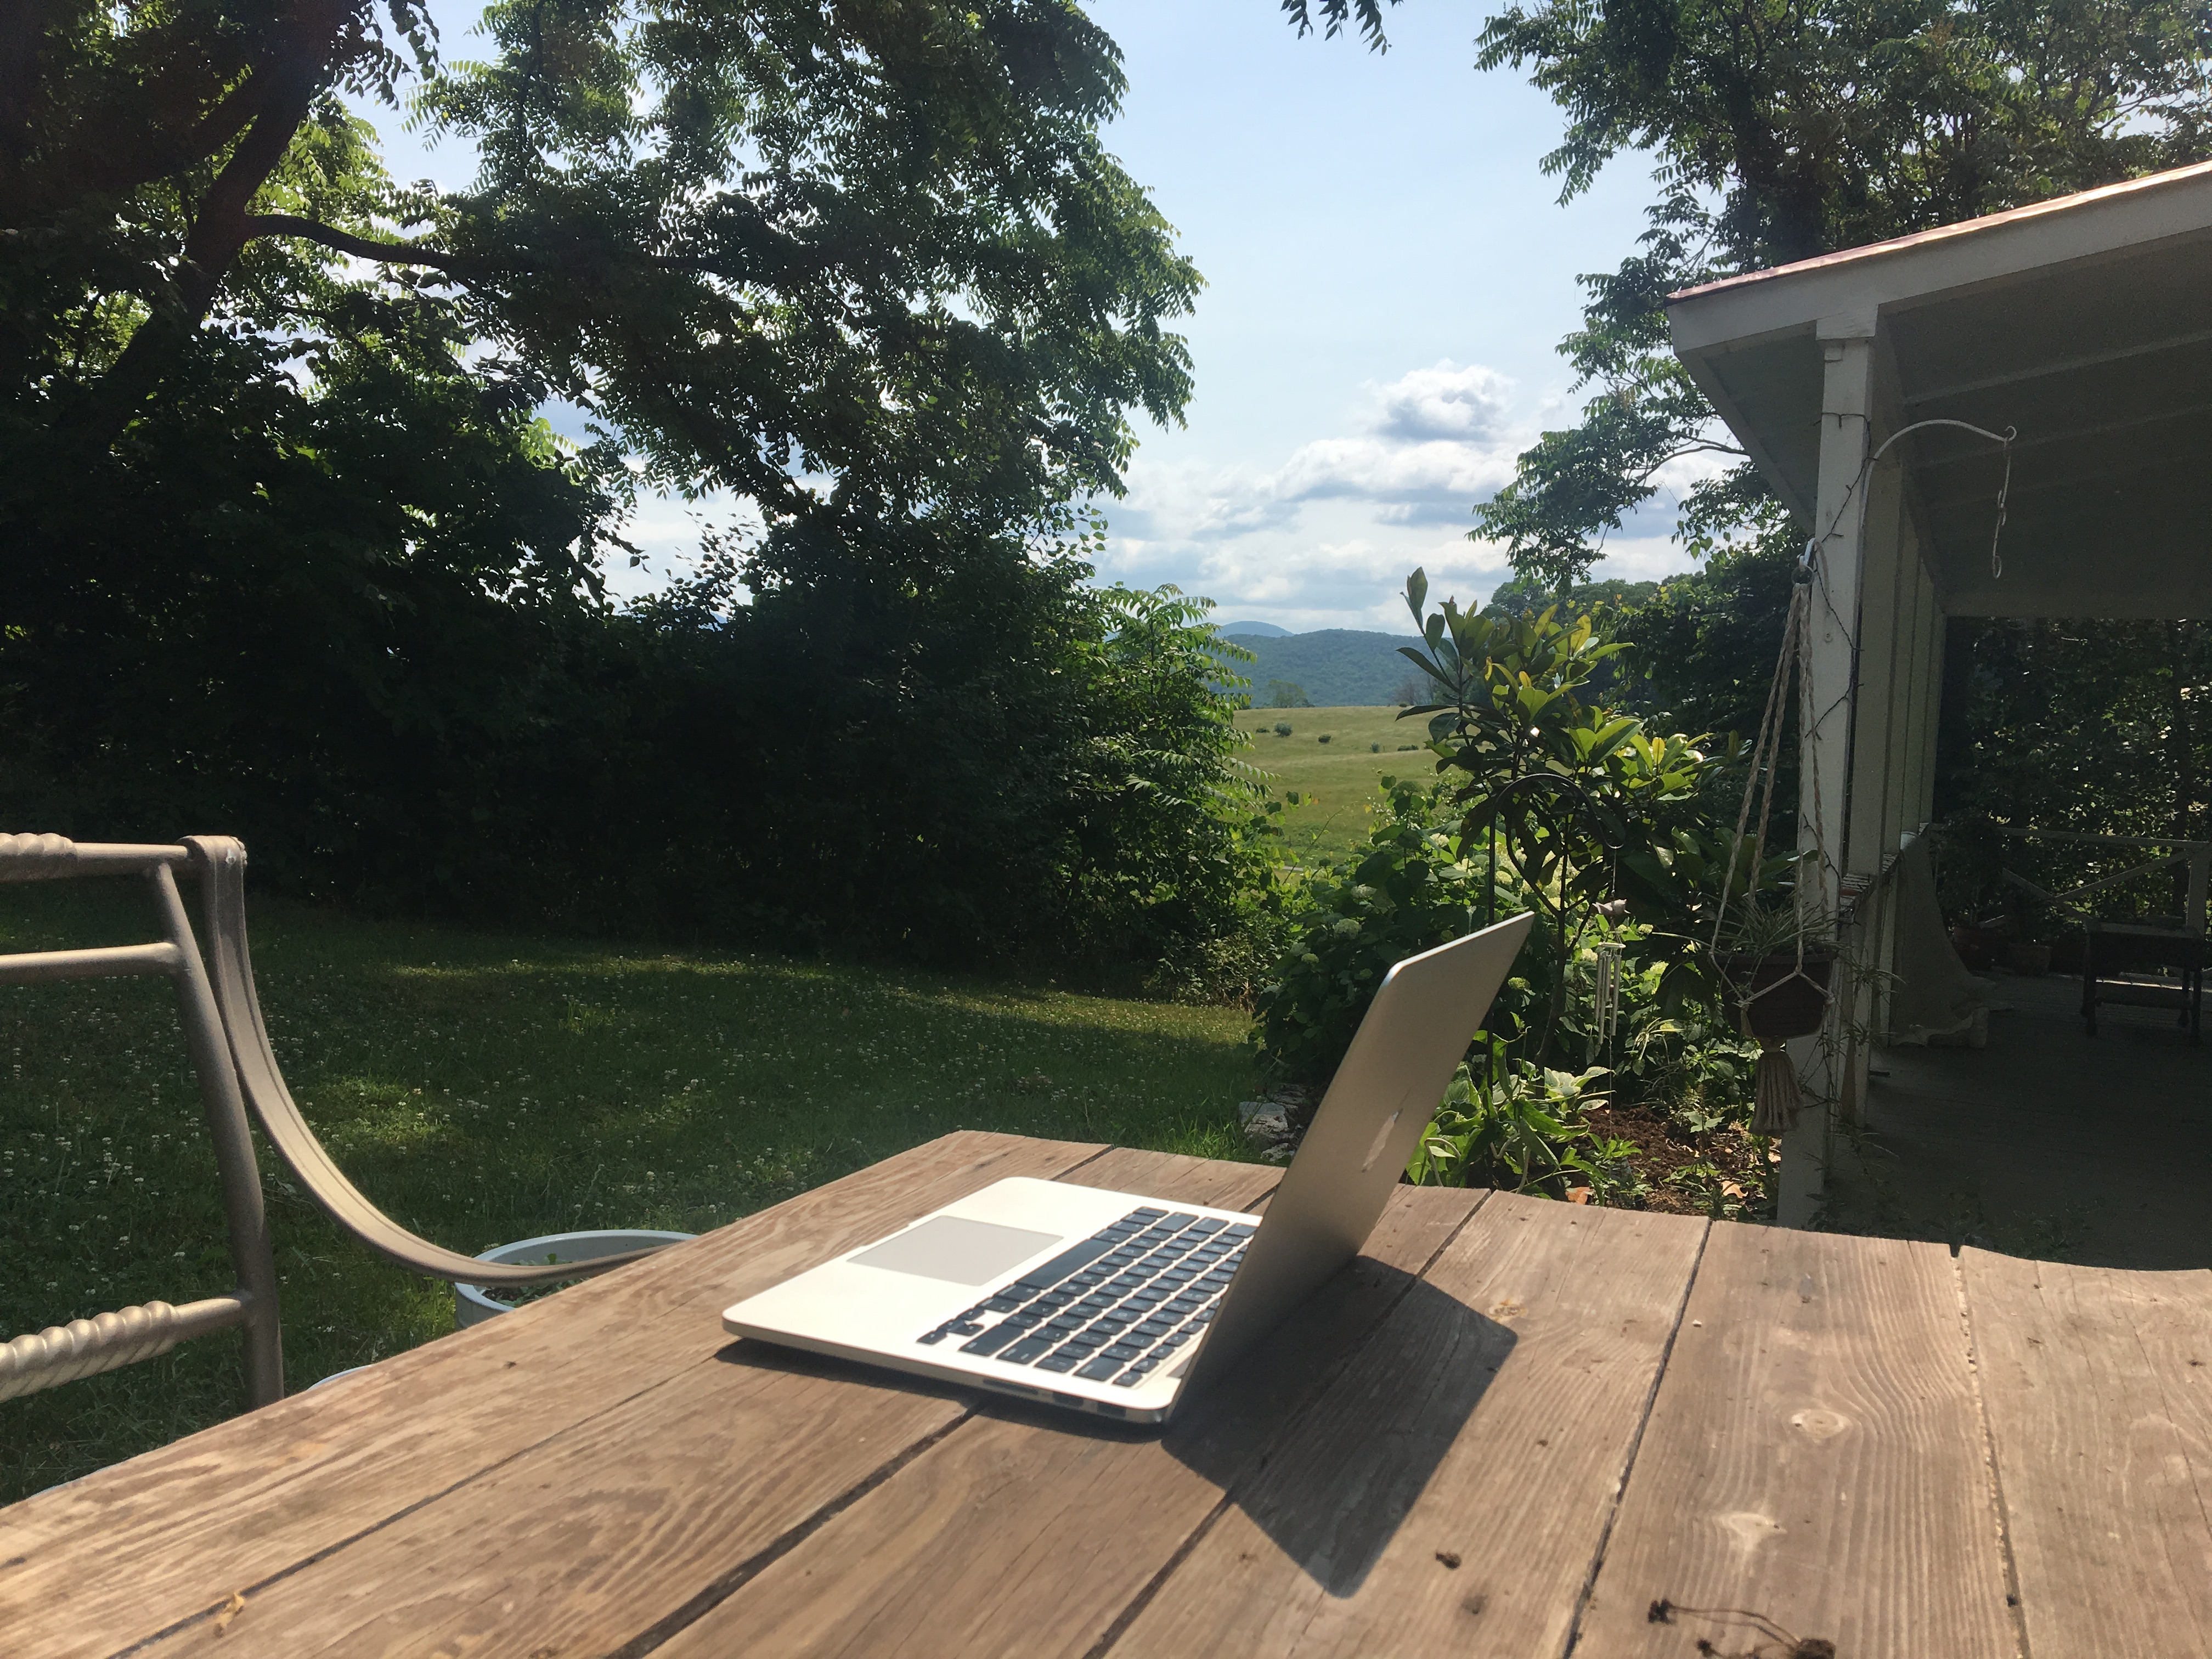 laptop on table in outdoor setting